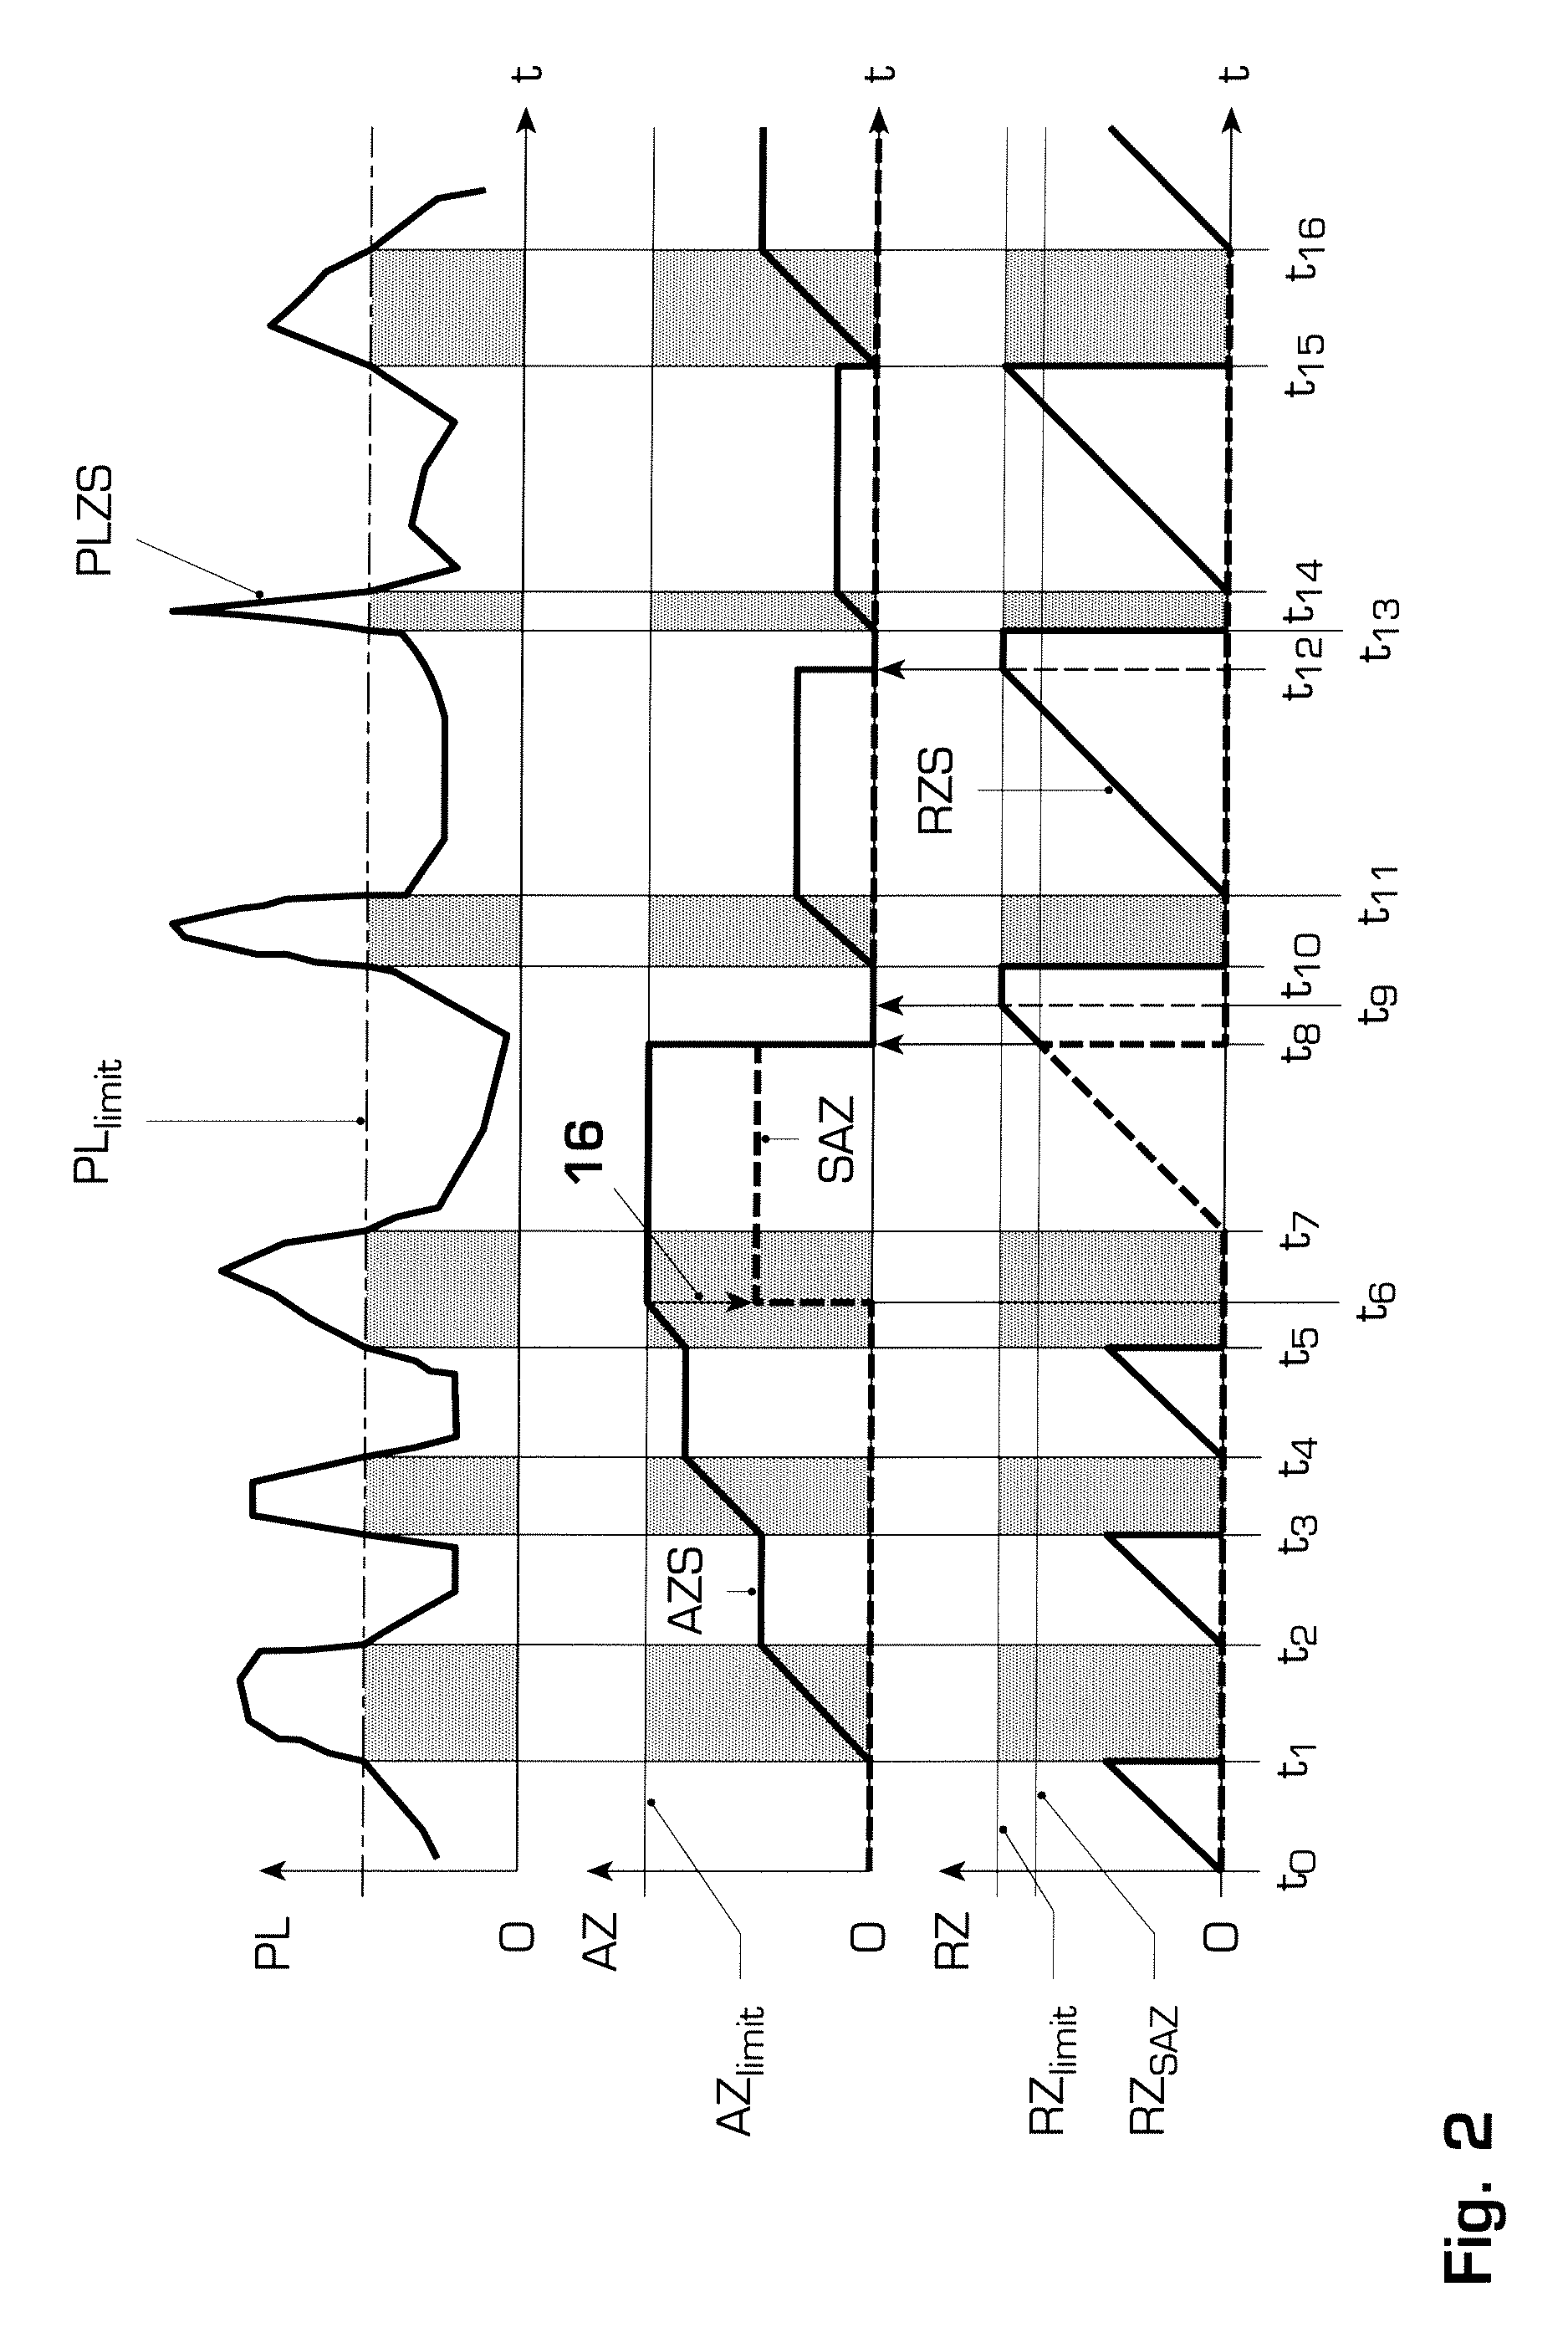 Protection process and control system for a gas turbine